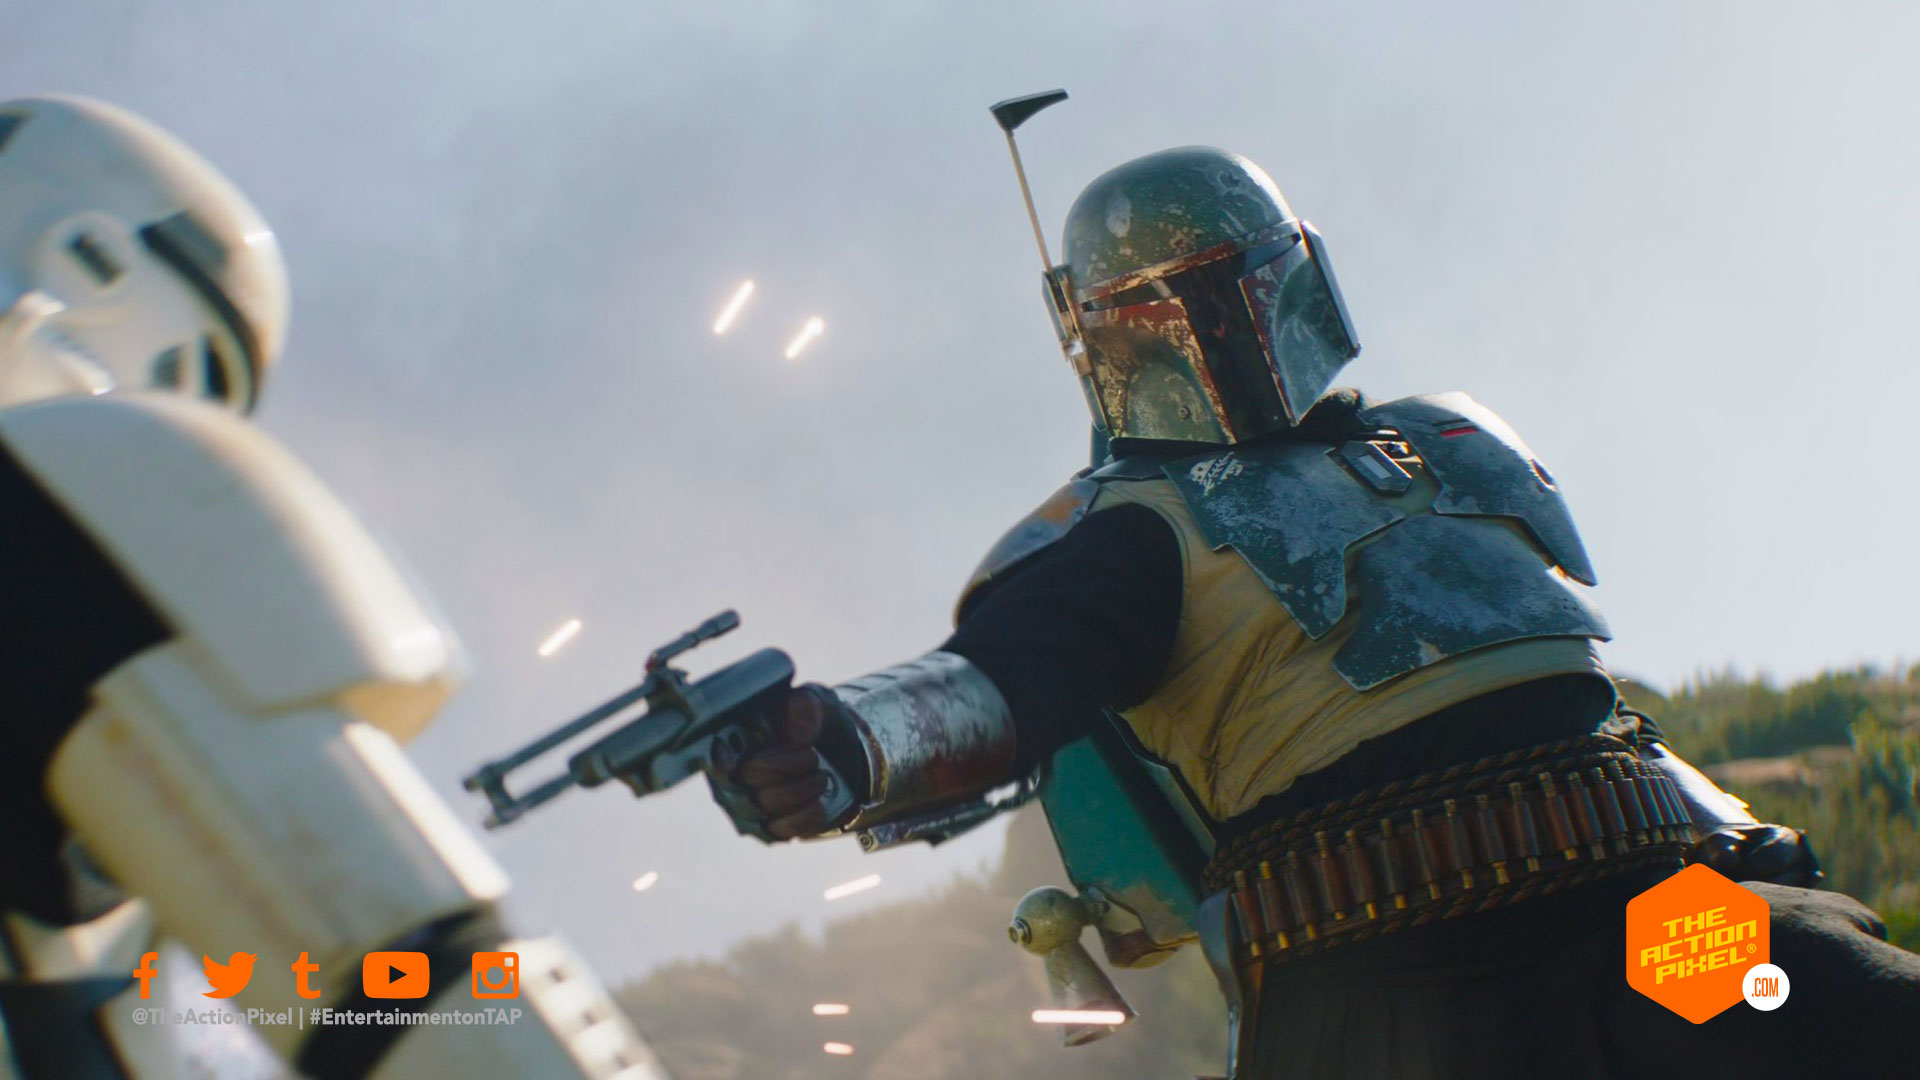 boba fett, the book of boba fett, the mandalorian, the mandalorian spin-off, boba fett disney plus, boba fett series, star wars boba fett disney plus, disney plus, disneyplus, disney+ , the book of boba fett disney plus, the book of boba fett release date, the book of boba fett star wars, the book of boba fett poster,, featured, the action pixel, entertainment on tap,